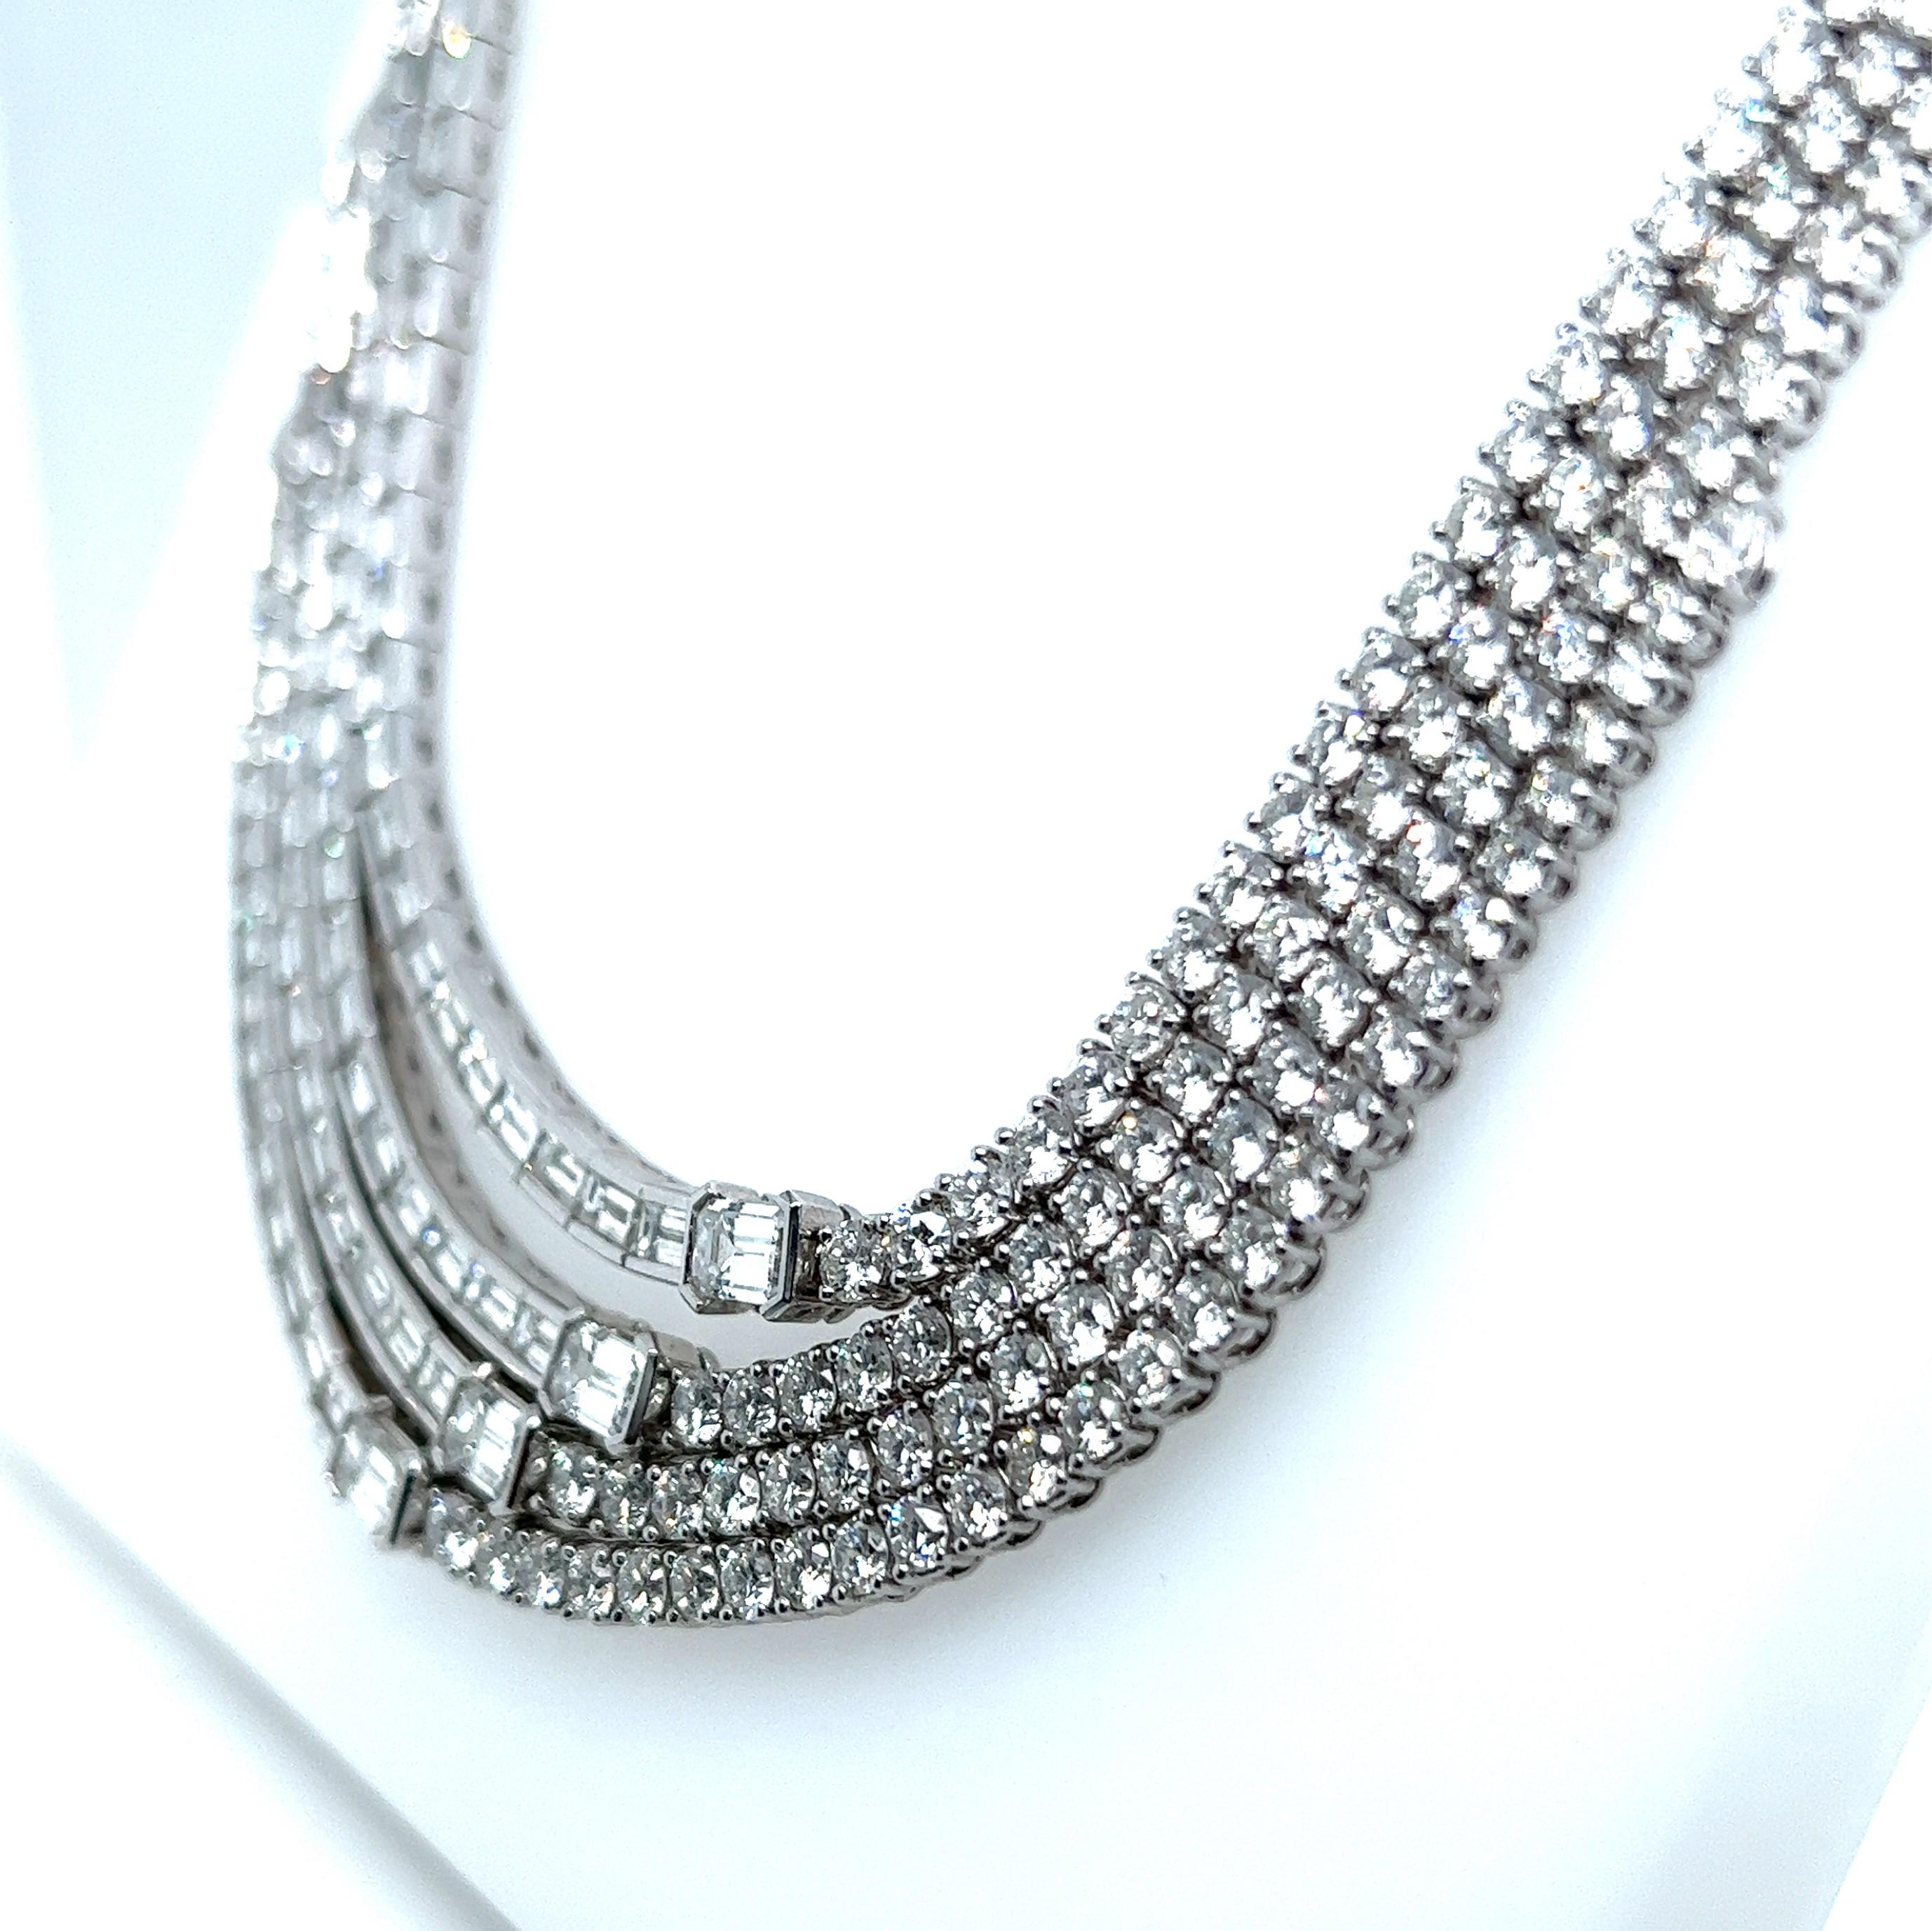 Platinum diamond necklace is a timeless classic that will take a prominent place in your jewellery collection. This piece was retailed by Beyer Watches & Jewellery, a famous Zurich-based company, which is now in its eighth generation and never fails